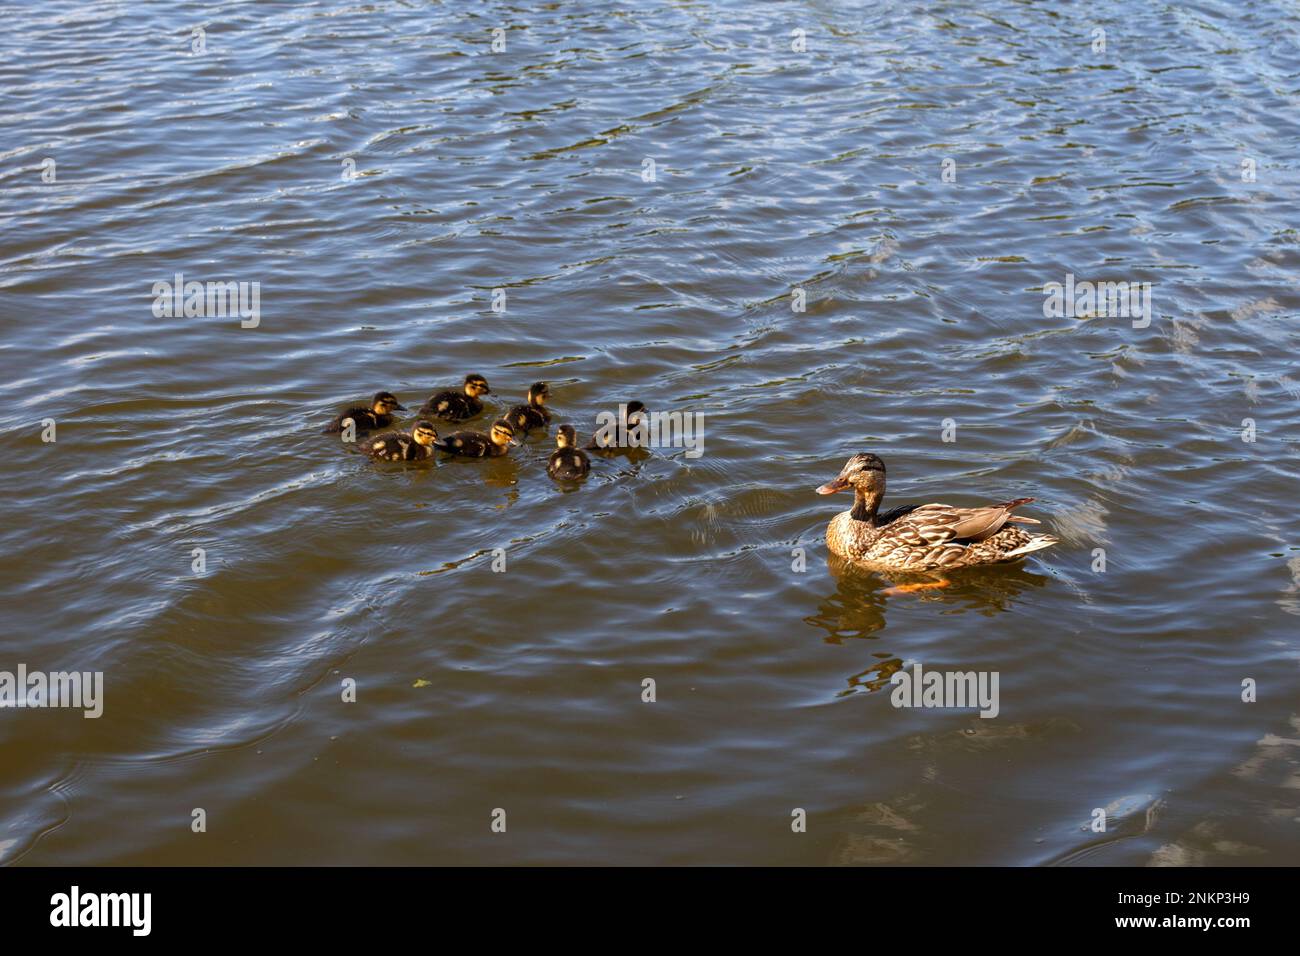 Mother duck with her group of beautiful, fluffy ducklings swimming together on a lake. Wild animals in a pond. Stock Photo